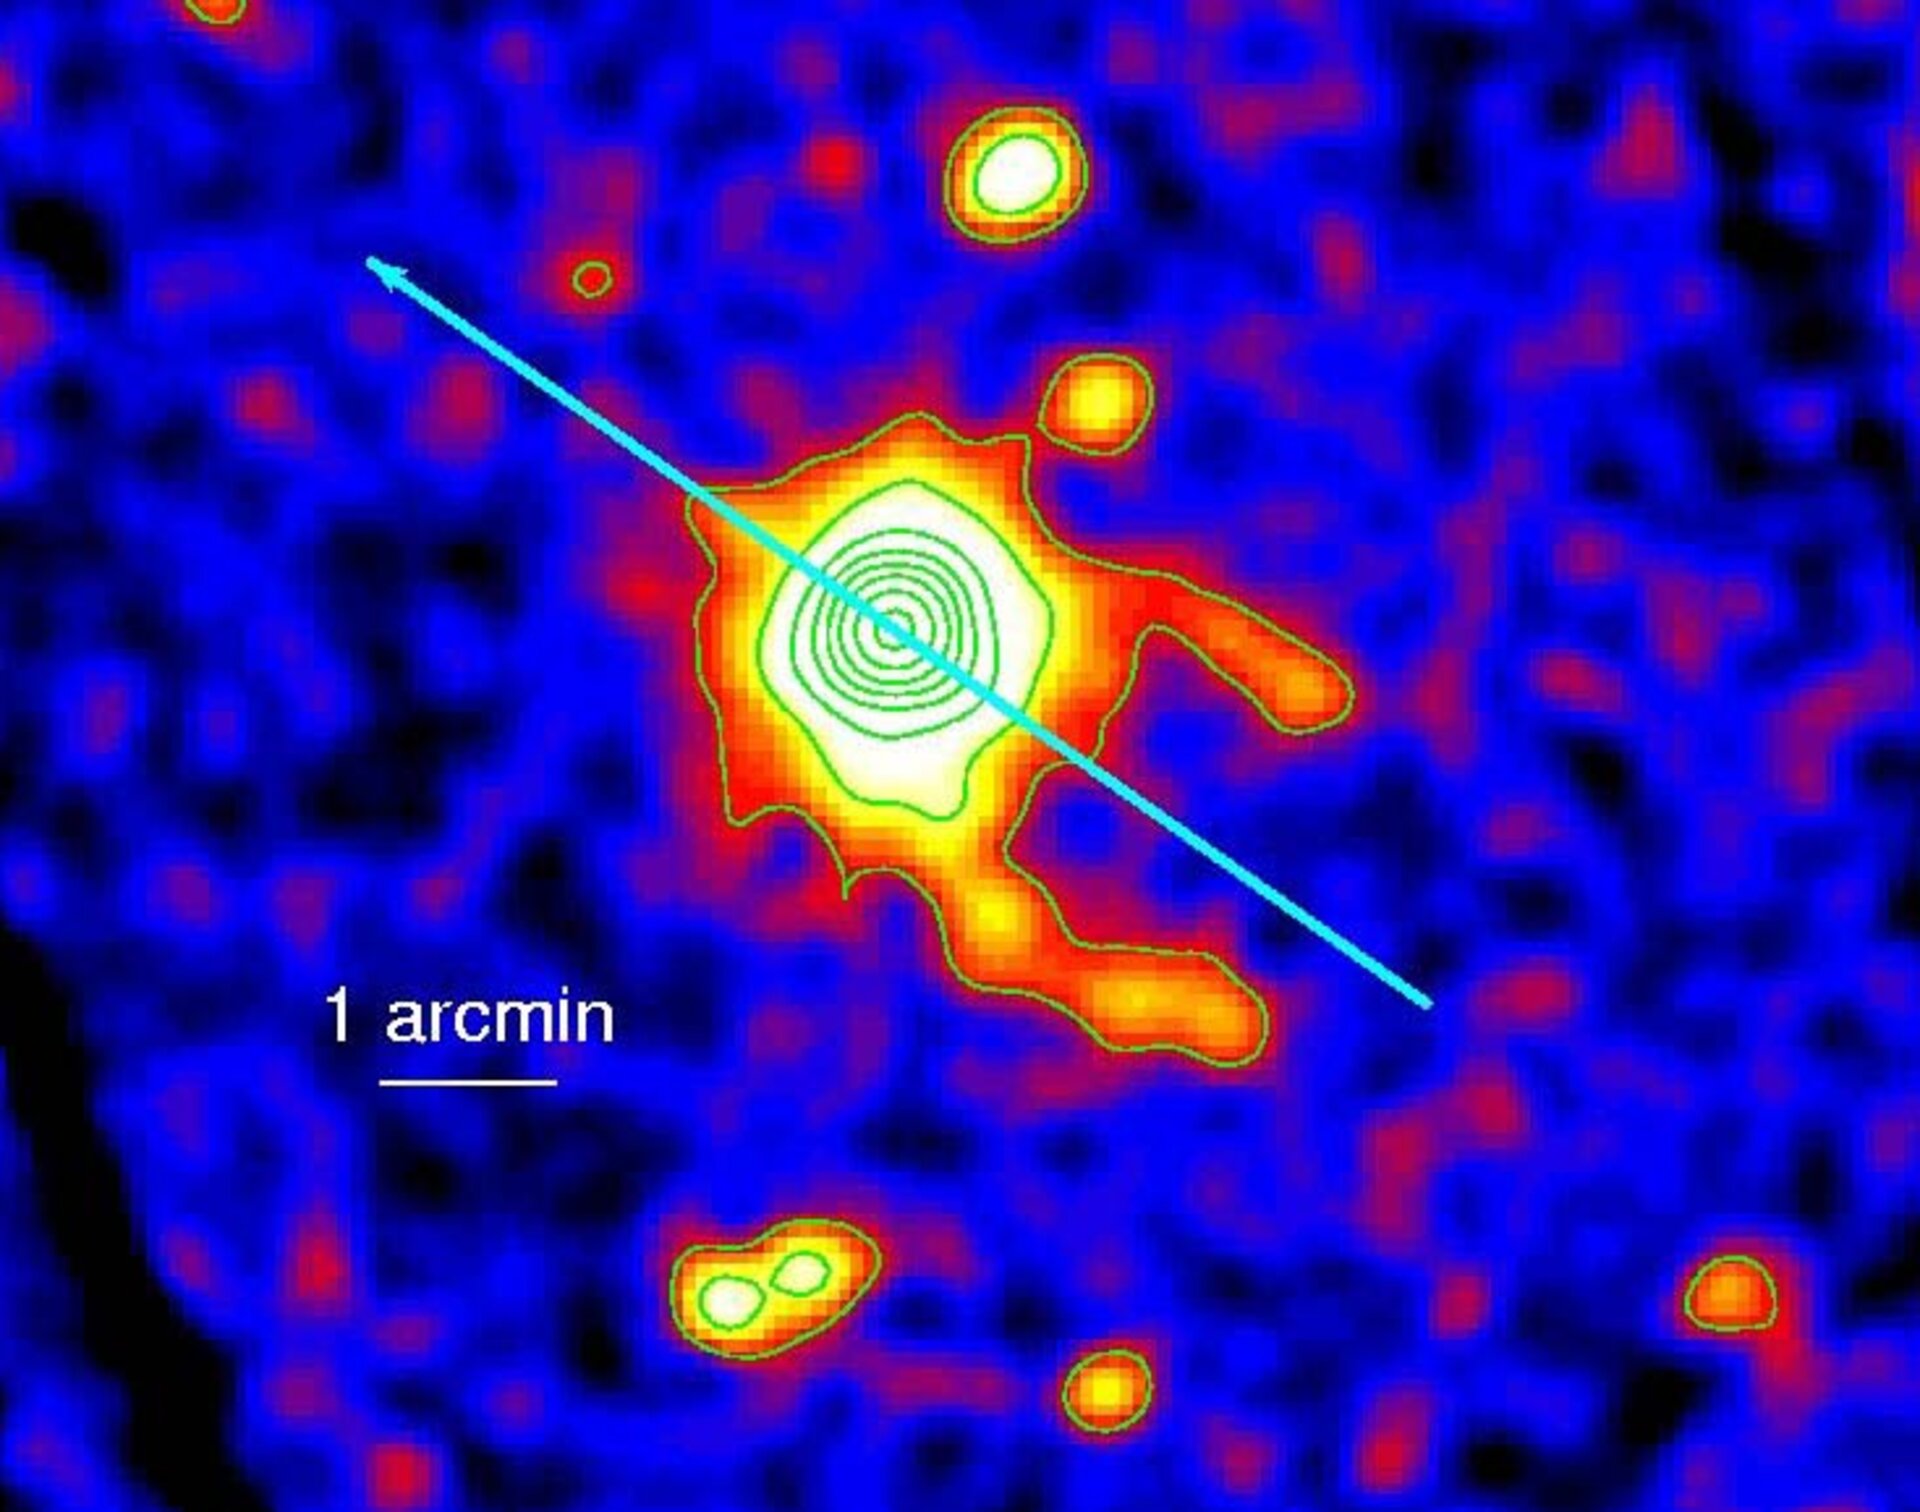 XMM-Newton image of Geminga showing the discovery of the twin tails